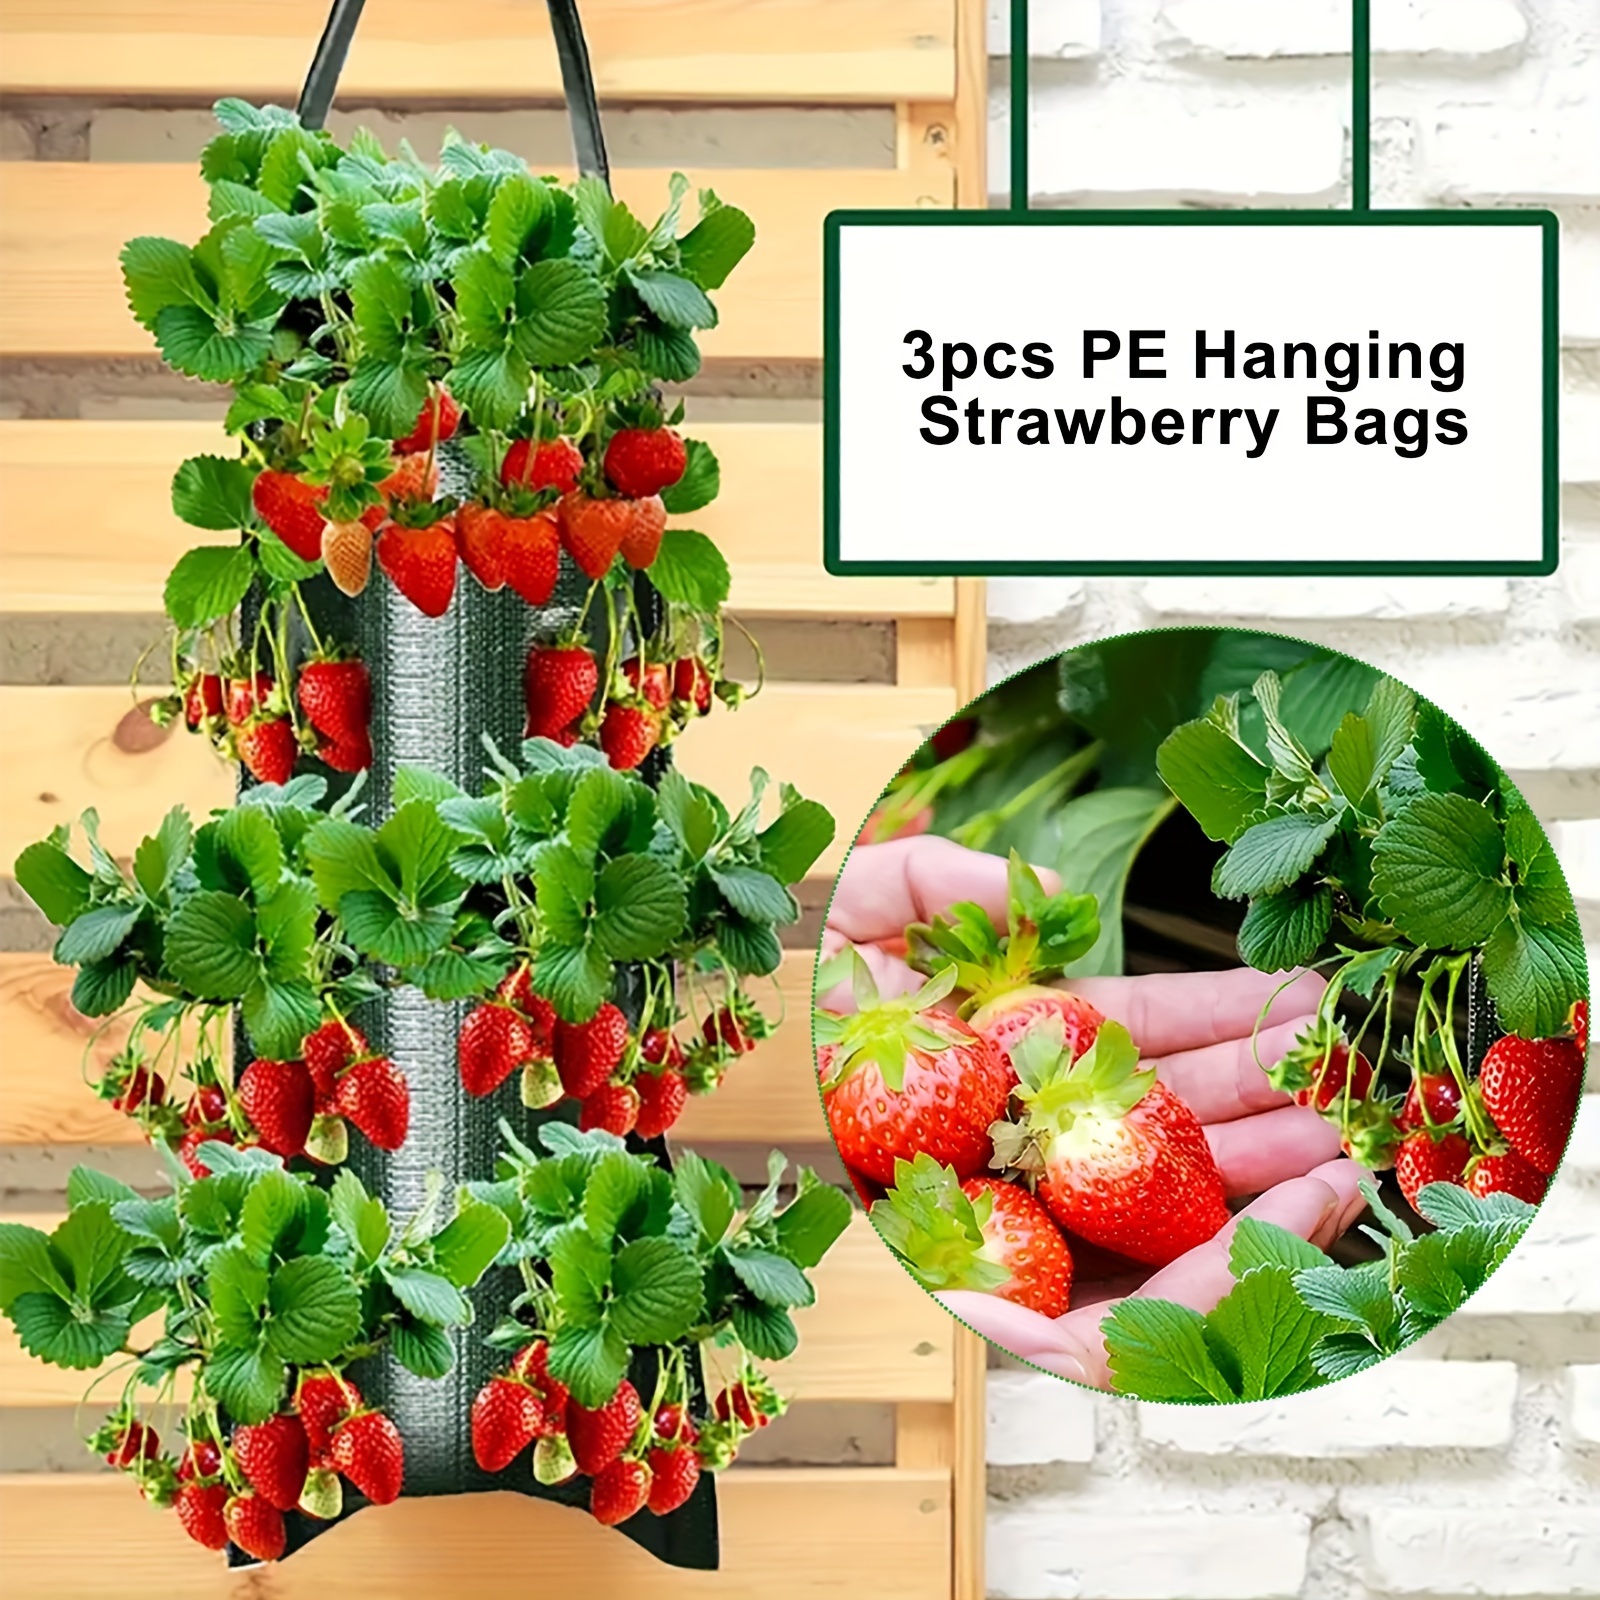 

3pcs Hanging Strawberry Flowerpot Bag, Strawberry Planting Bag, With 8 Holes, For Strawberry Tomato And Pepper Inverted Tomato Planter Vegetable Planting Bag, Pots, Planters & Container Accessories